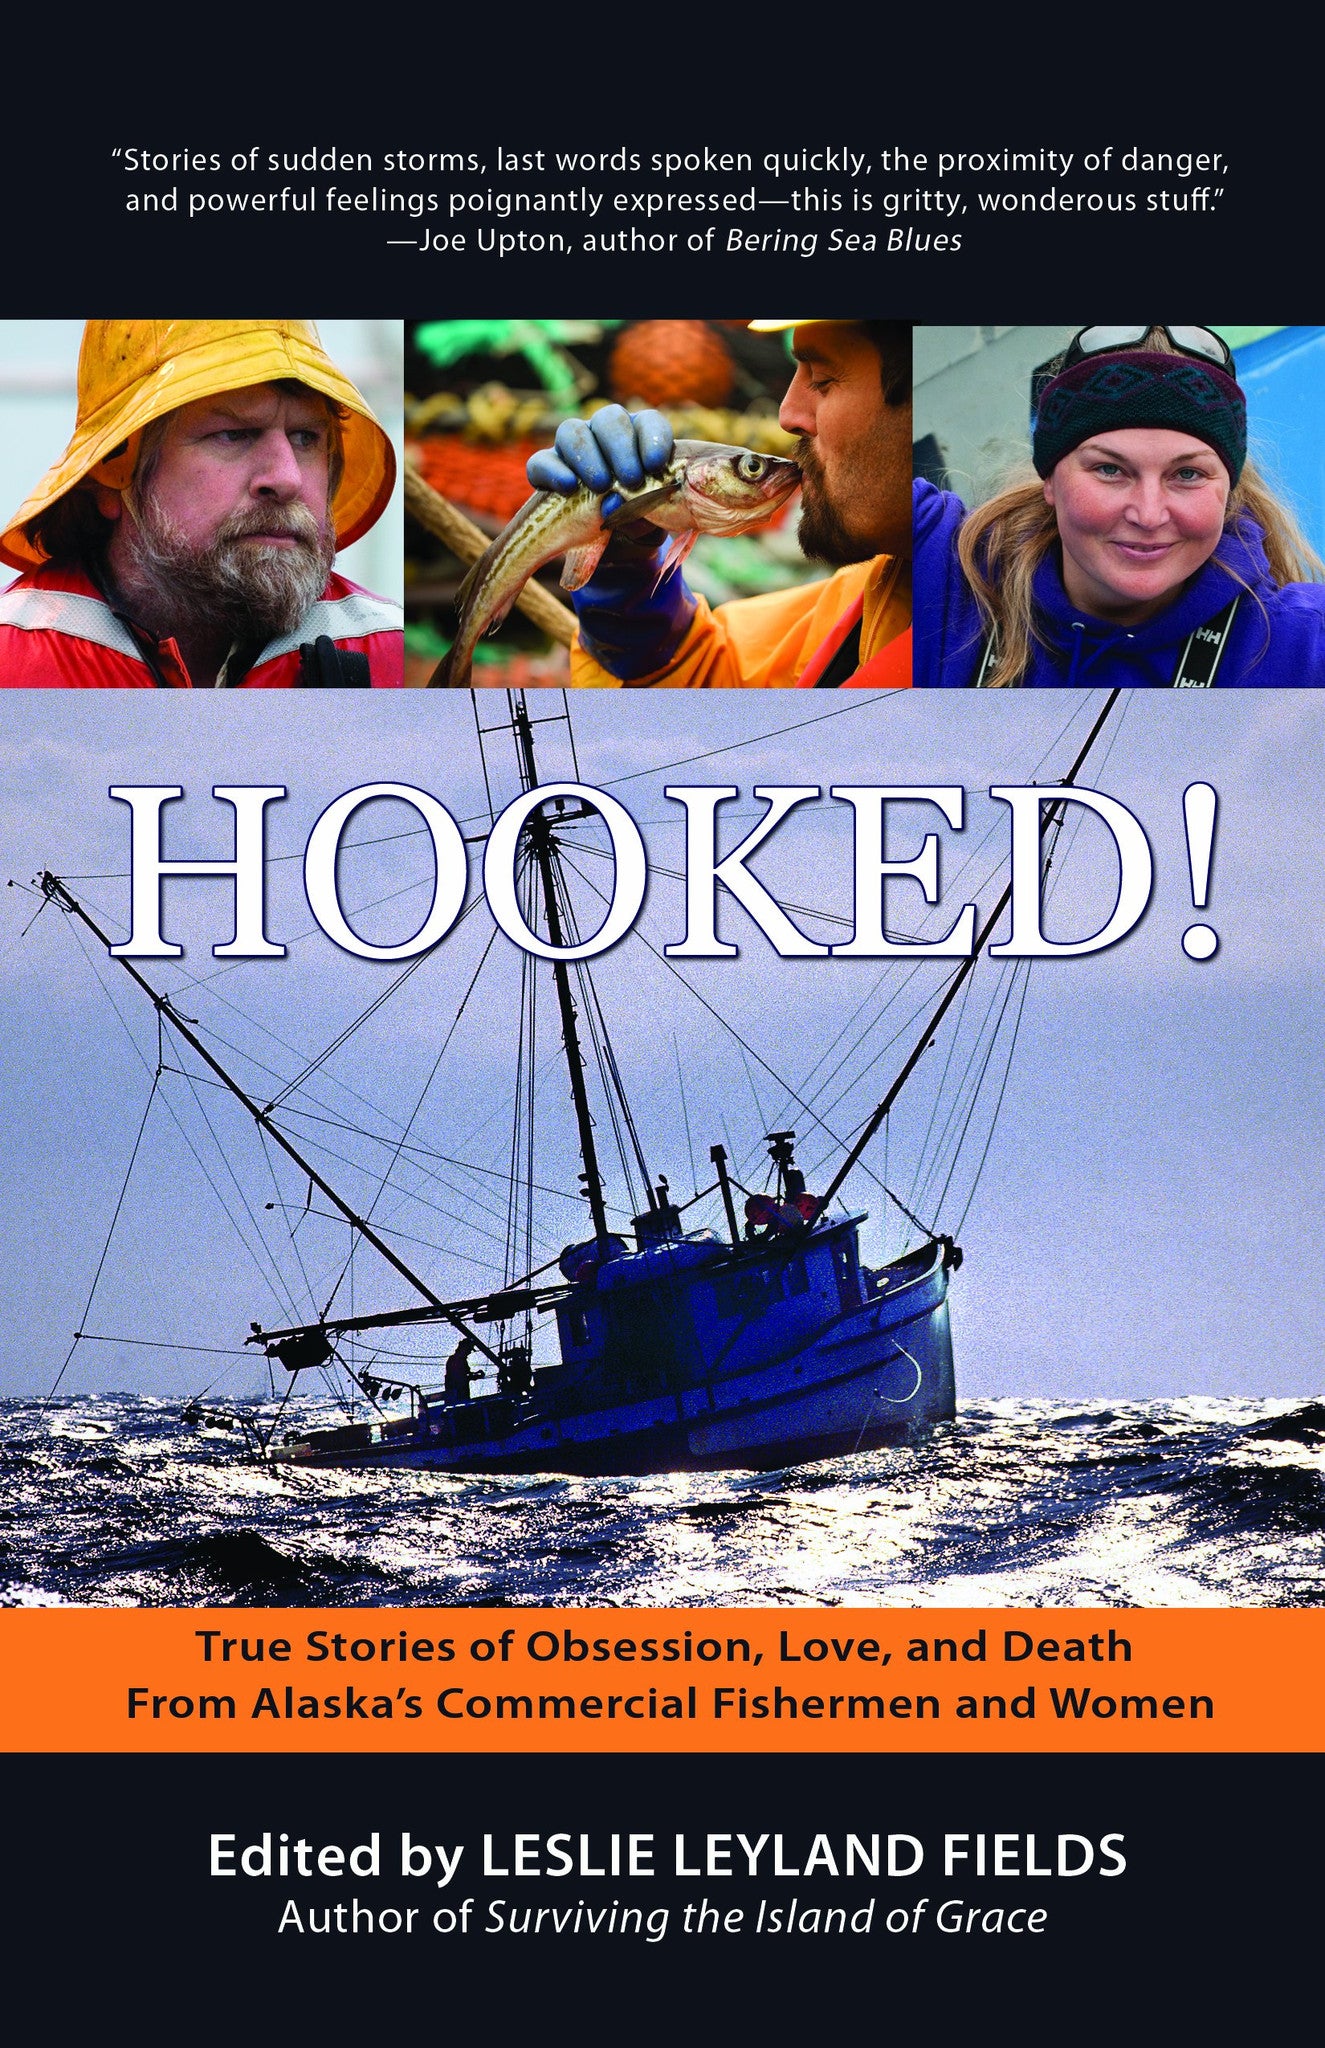 Hooked!: True Stories of Obsession, Death, and Love from Alaska's Commercial Fishing Men and Women by Leslie Leyland Fields